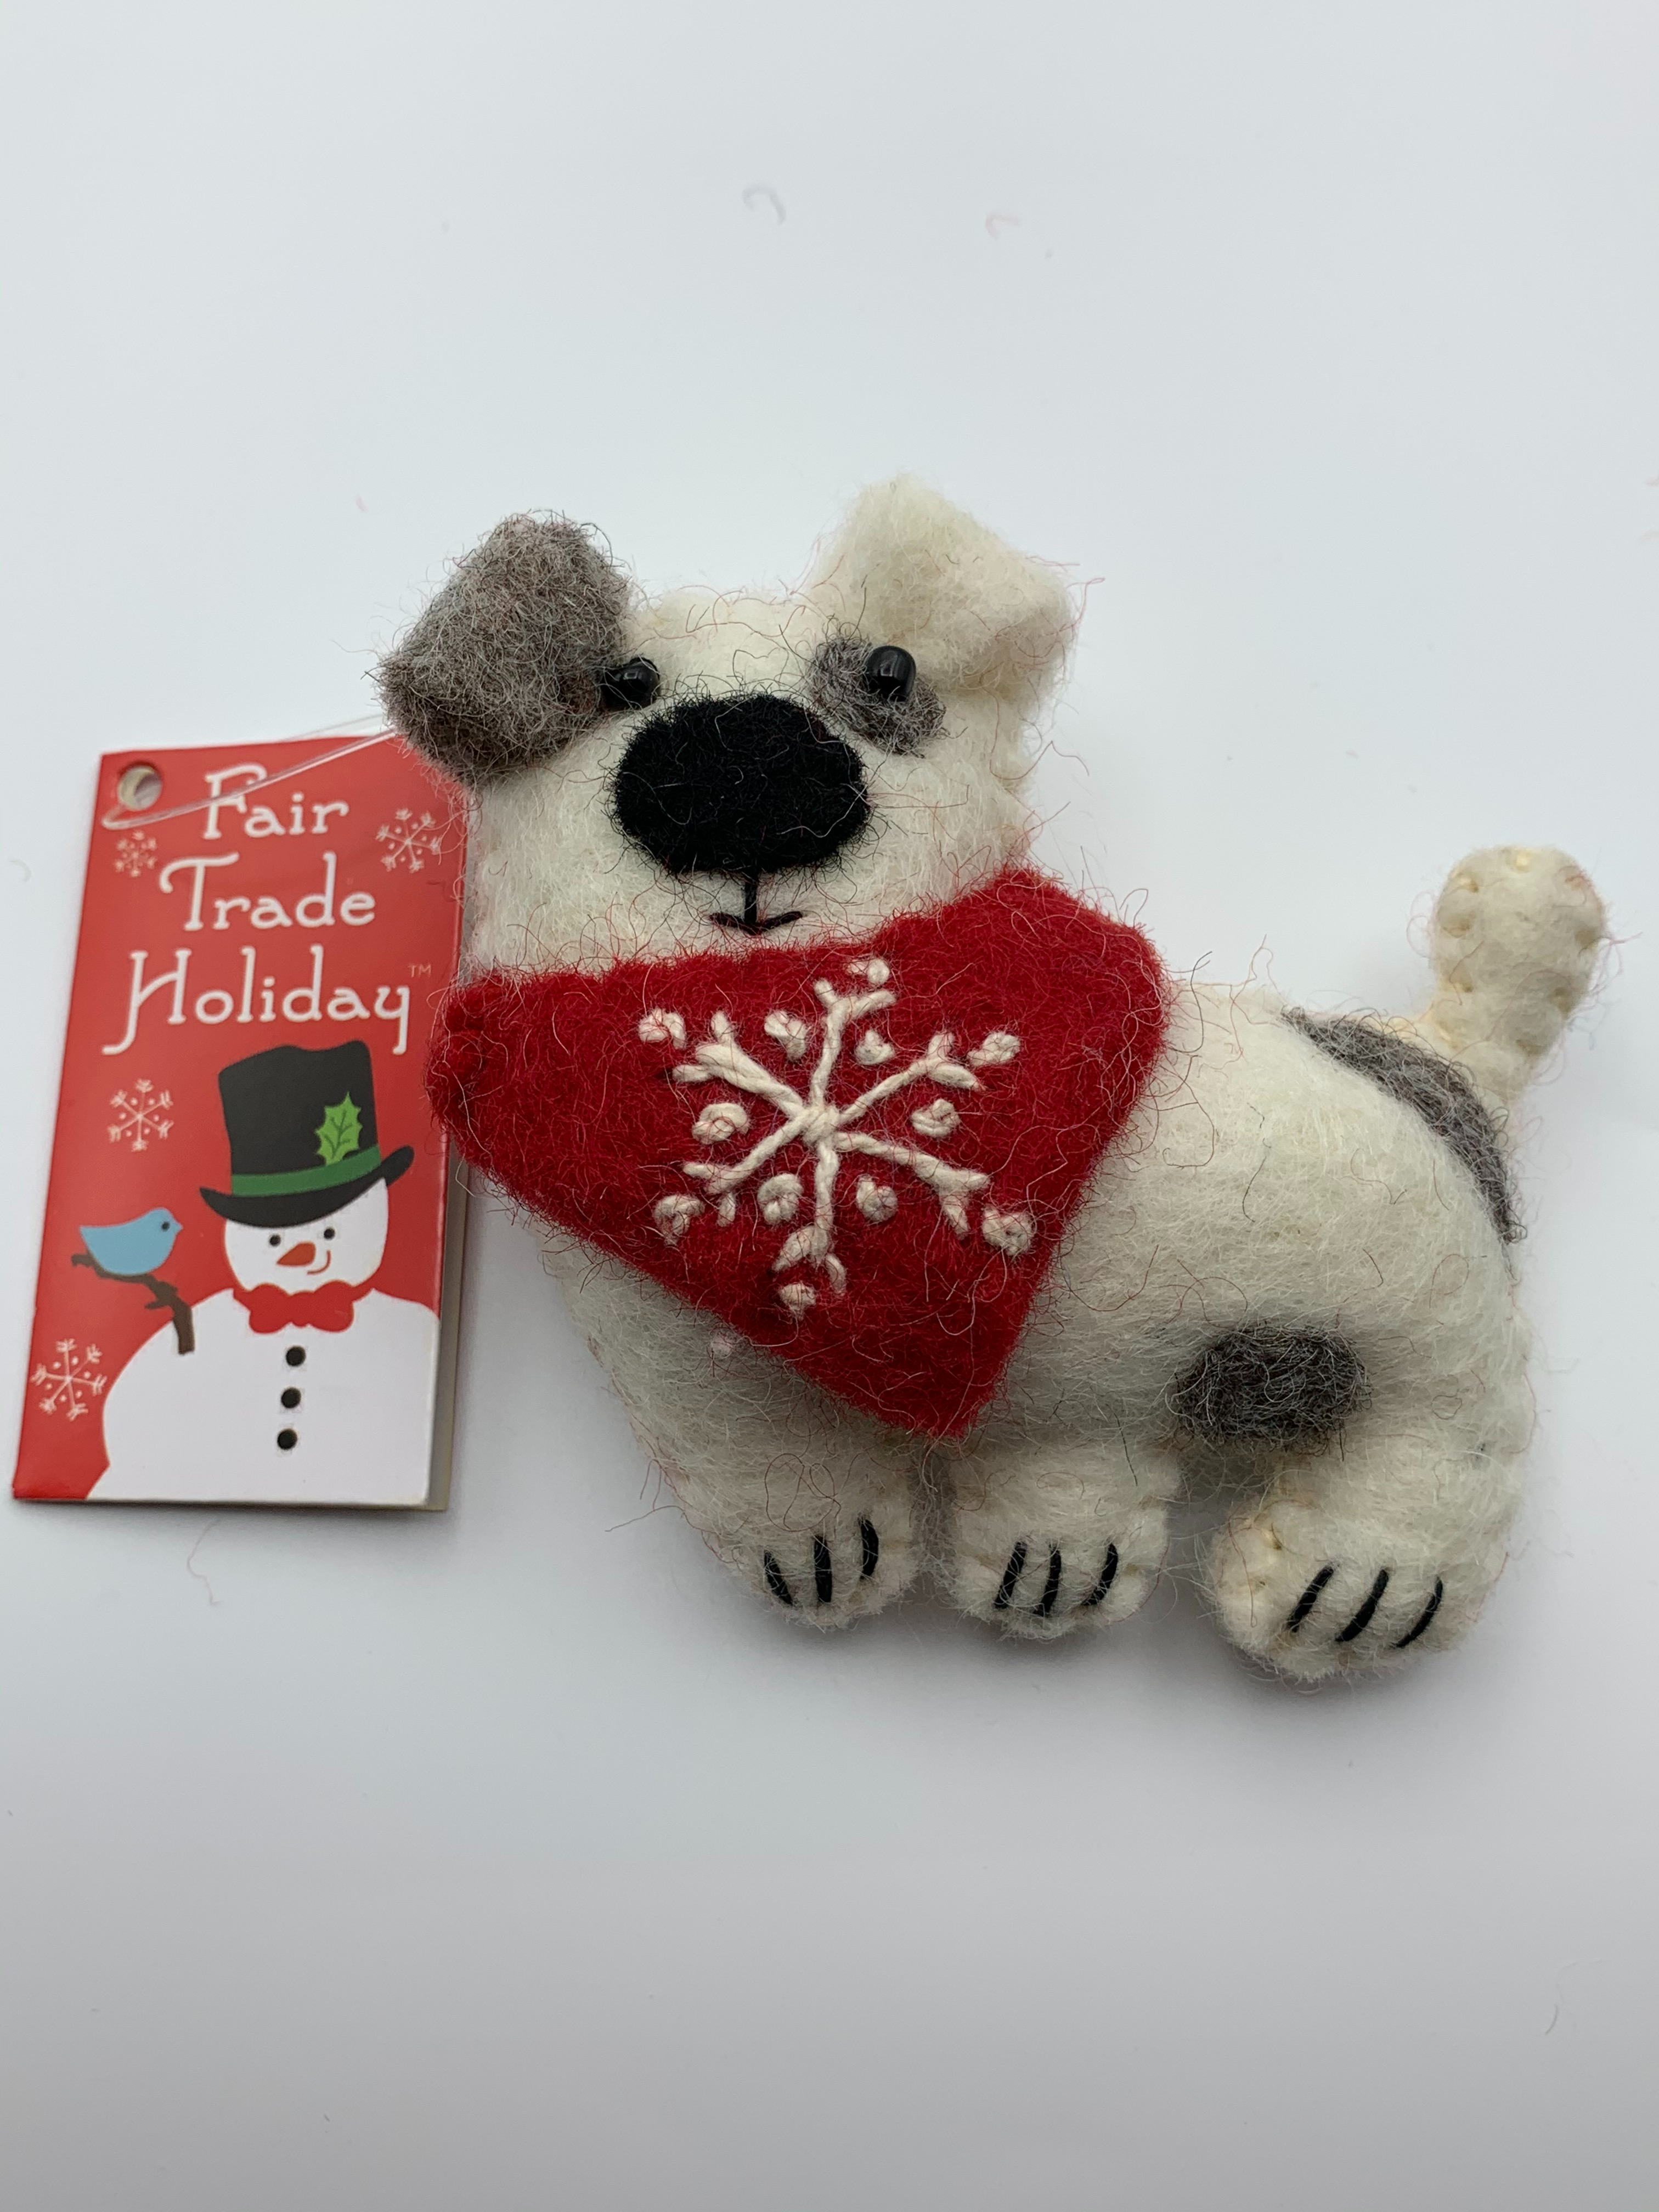 This close-up of Patches the dog is a hand-crafted (fair trade) Christmas ornament made of 100% natural wool. He is off-white with brown patches and a red bandana with a 'signature' (white) snowflake on it. Approximately 3.75"x3.75". He comes with a detachable fair trade holiday tag to use if you are giving as a gift.